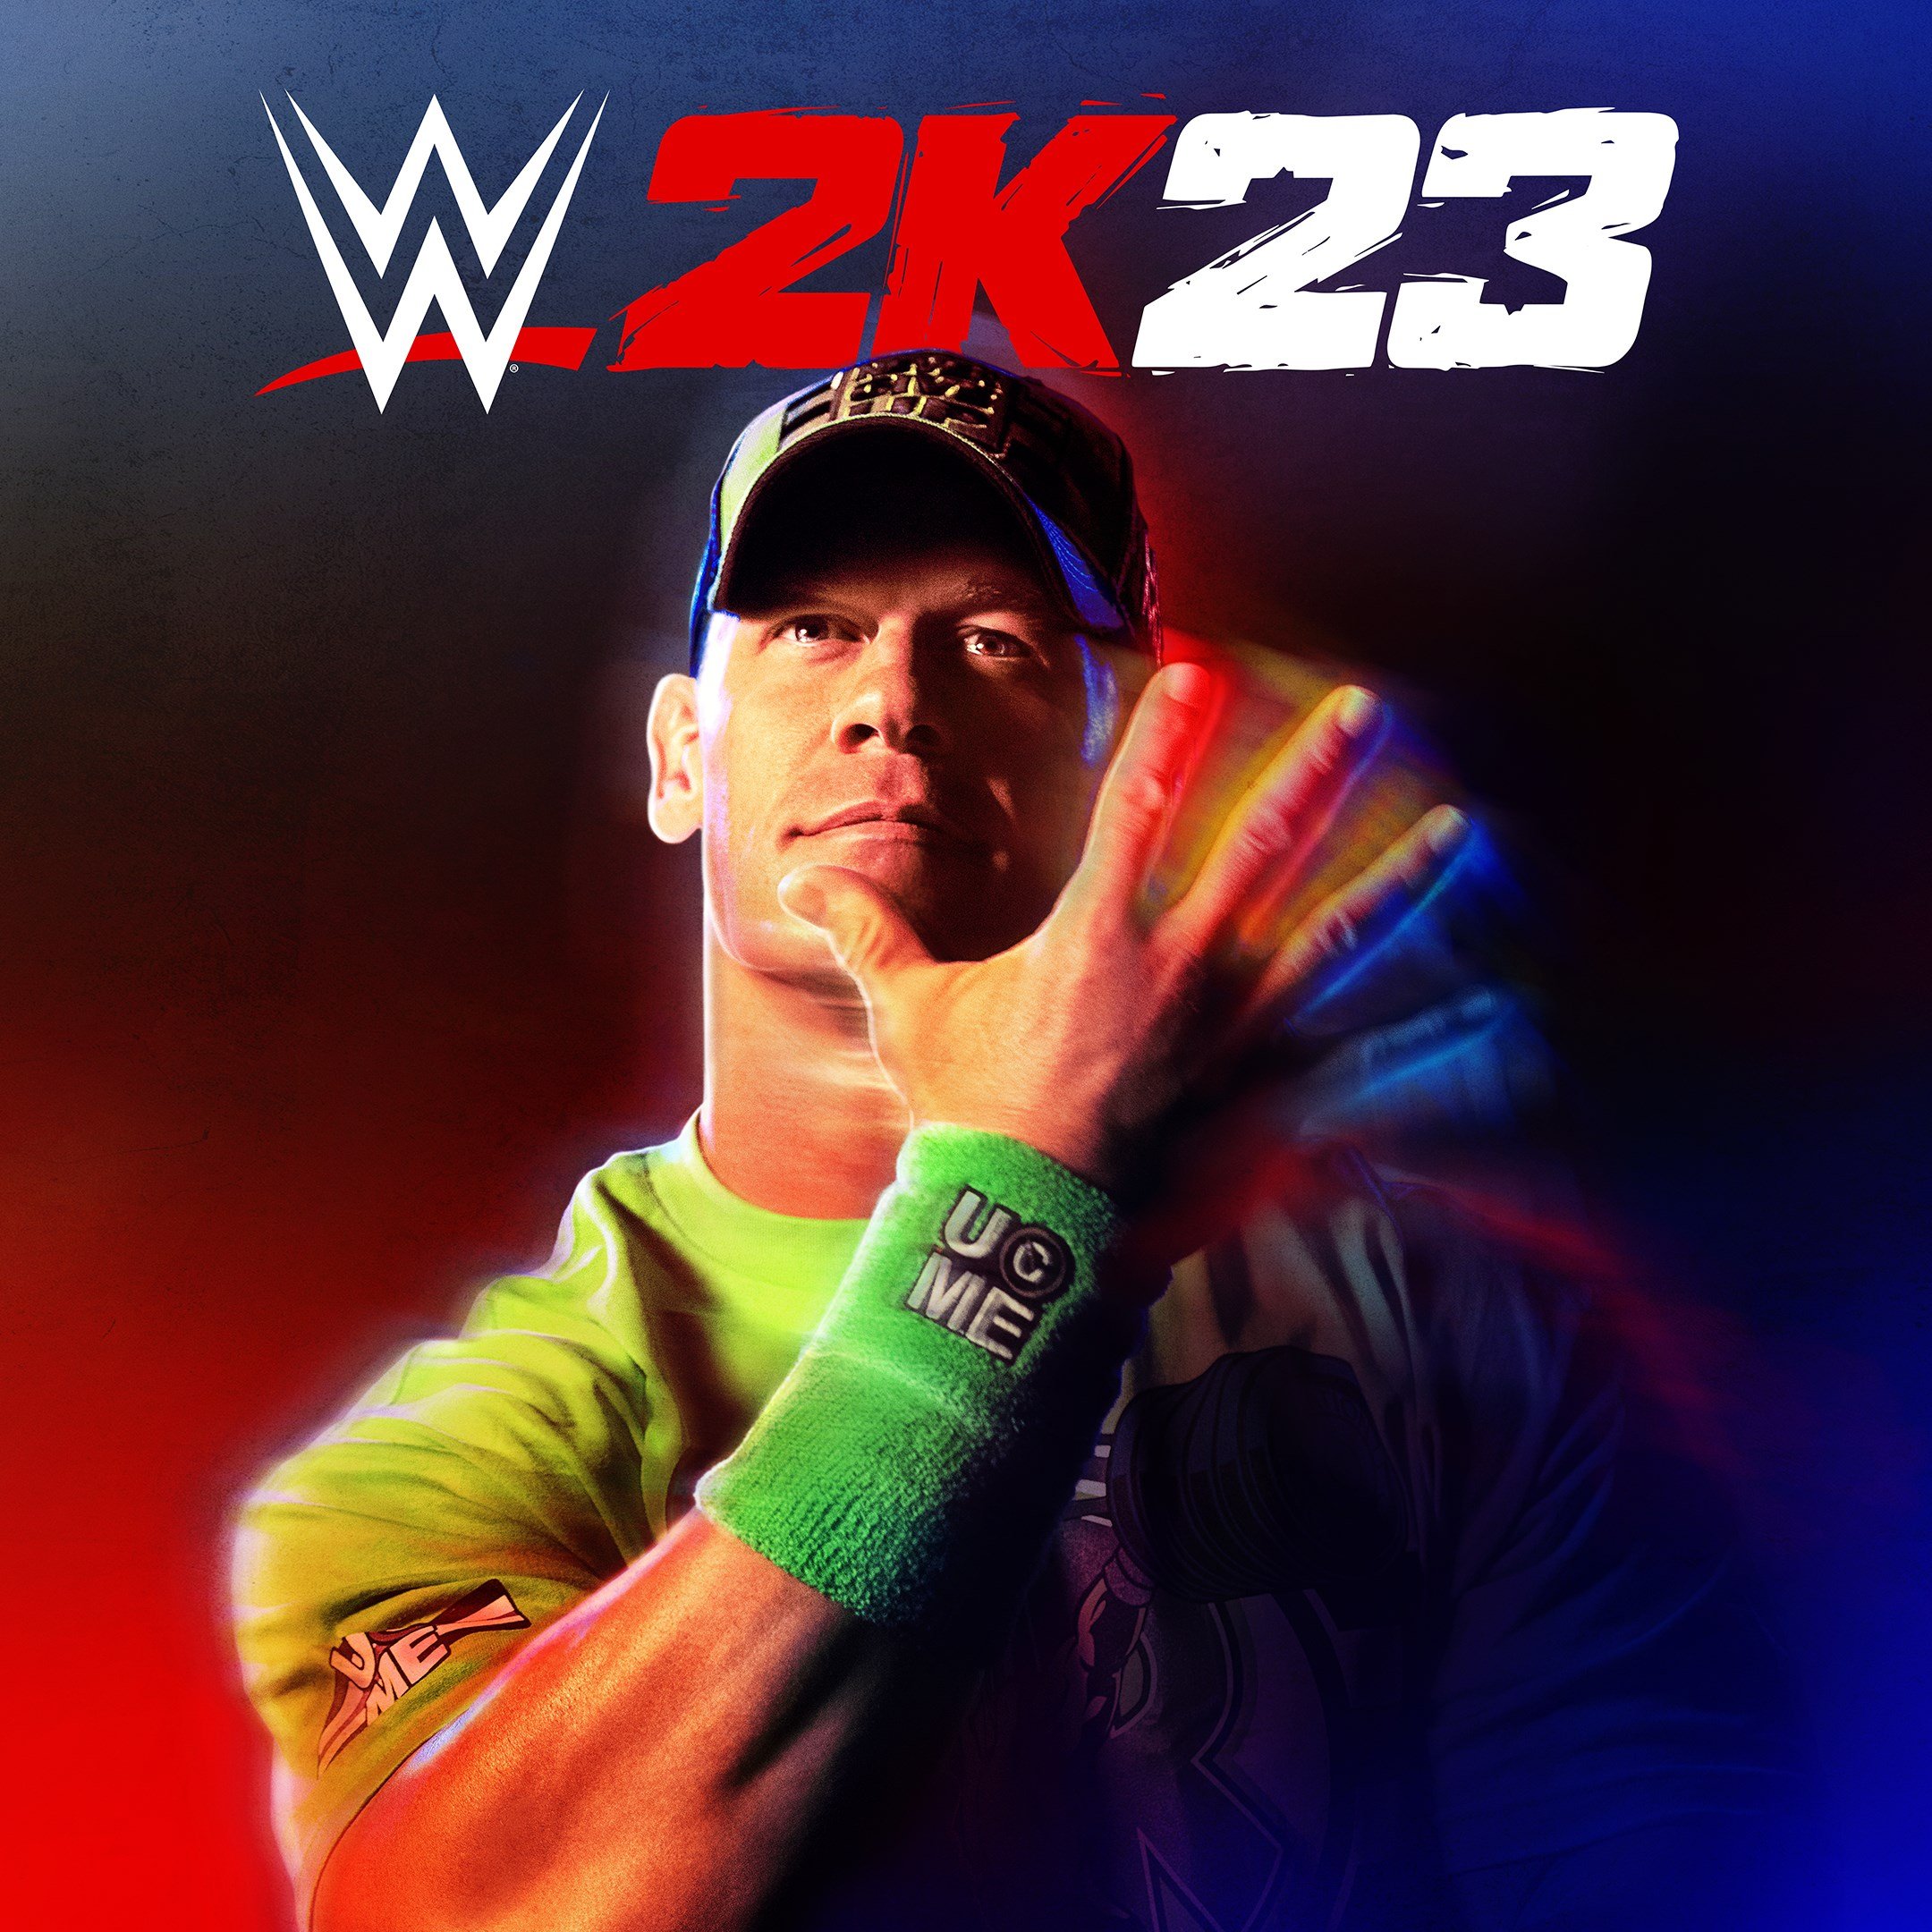 WWE 2K23 for Xbox Series X|S